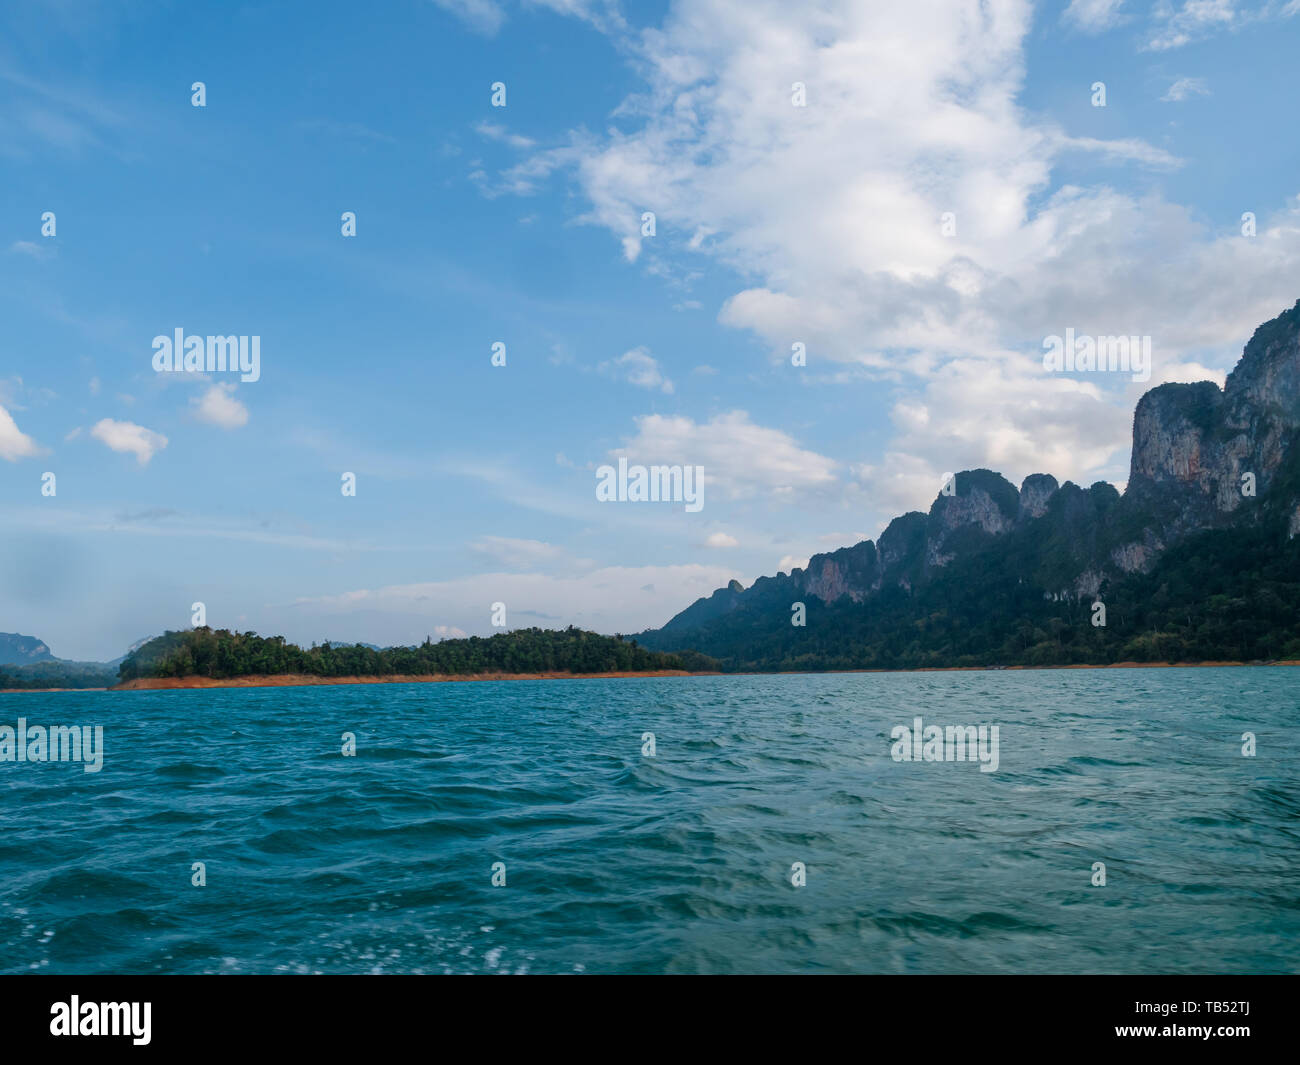 Scenic landscape of boat view in the big river and reservoir dam with mountain and nature forest Stock Photo